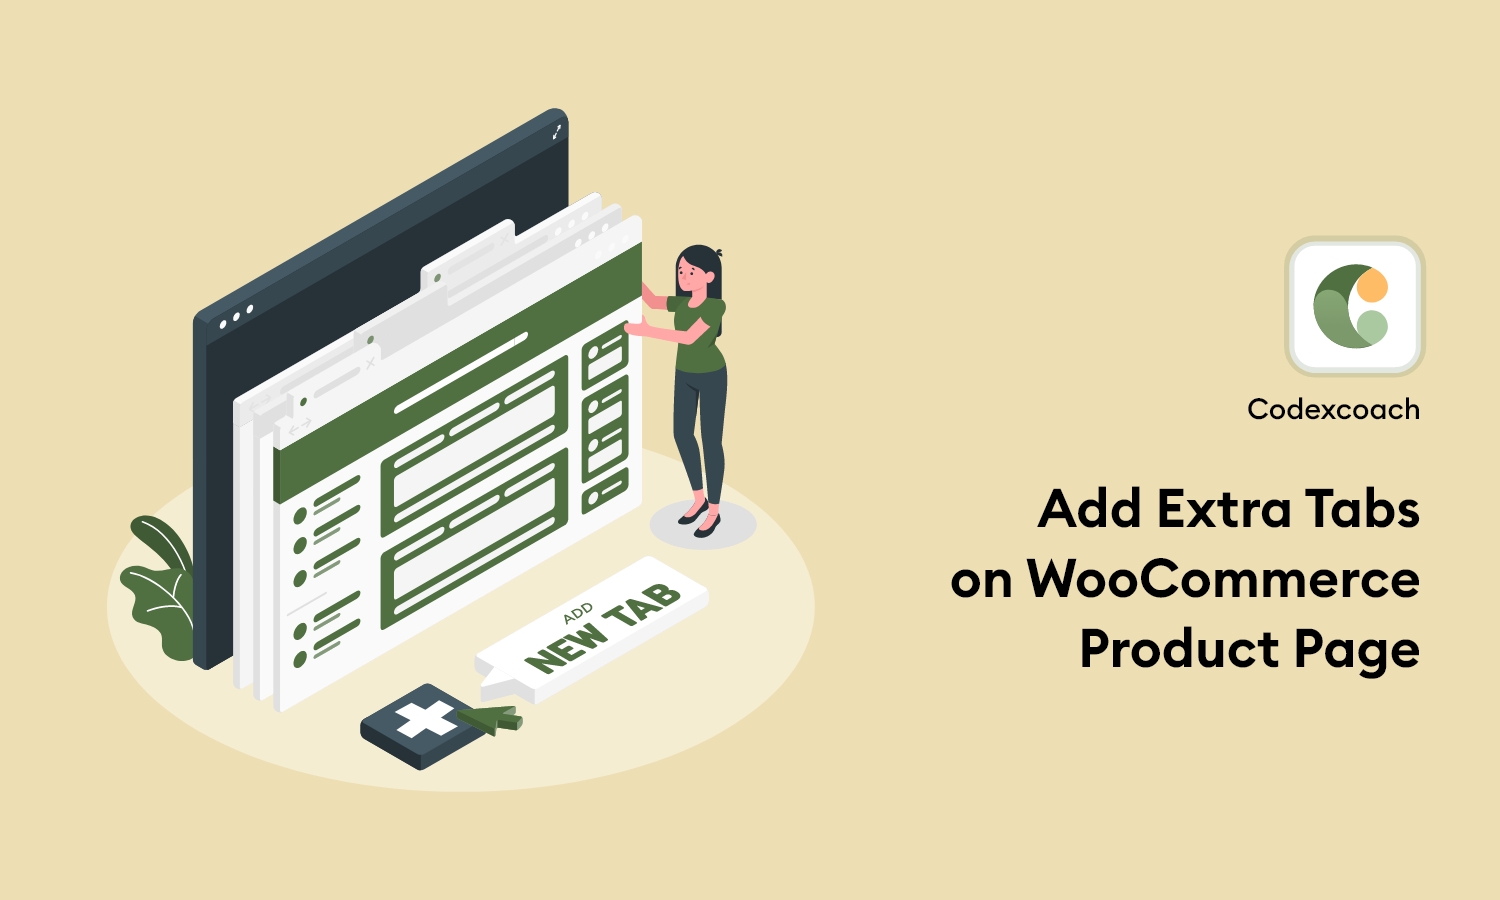 Add Extra Tabs on WooCommerce Product Page